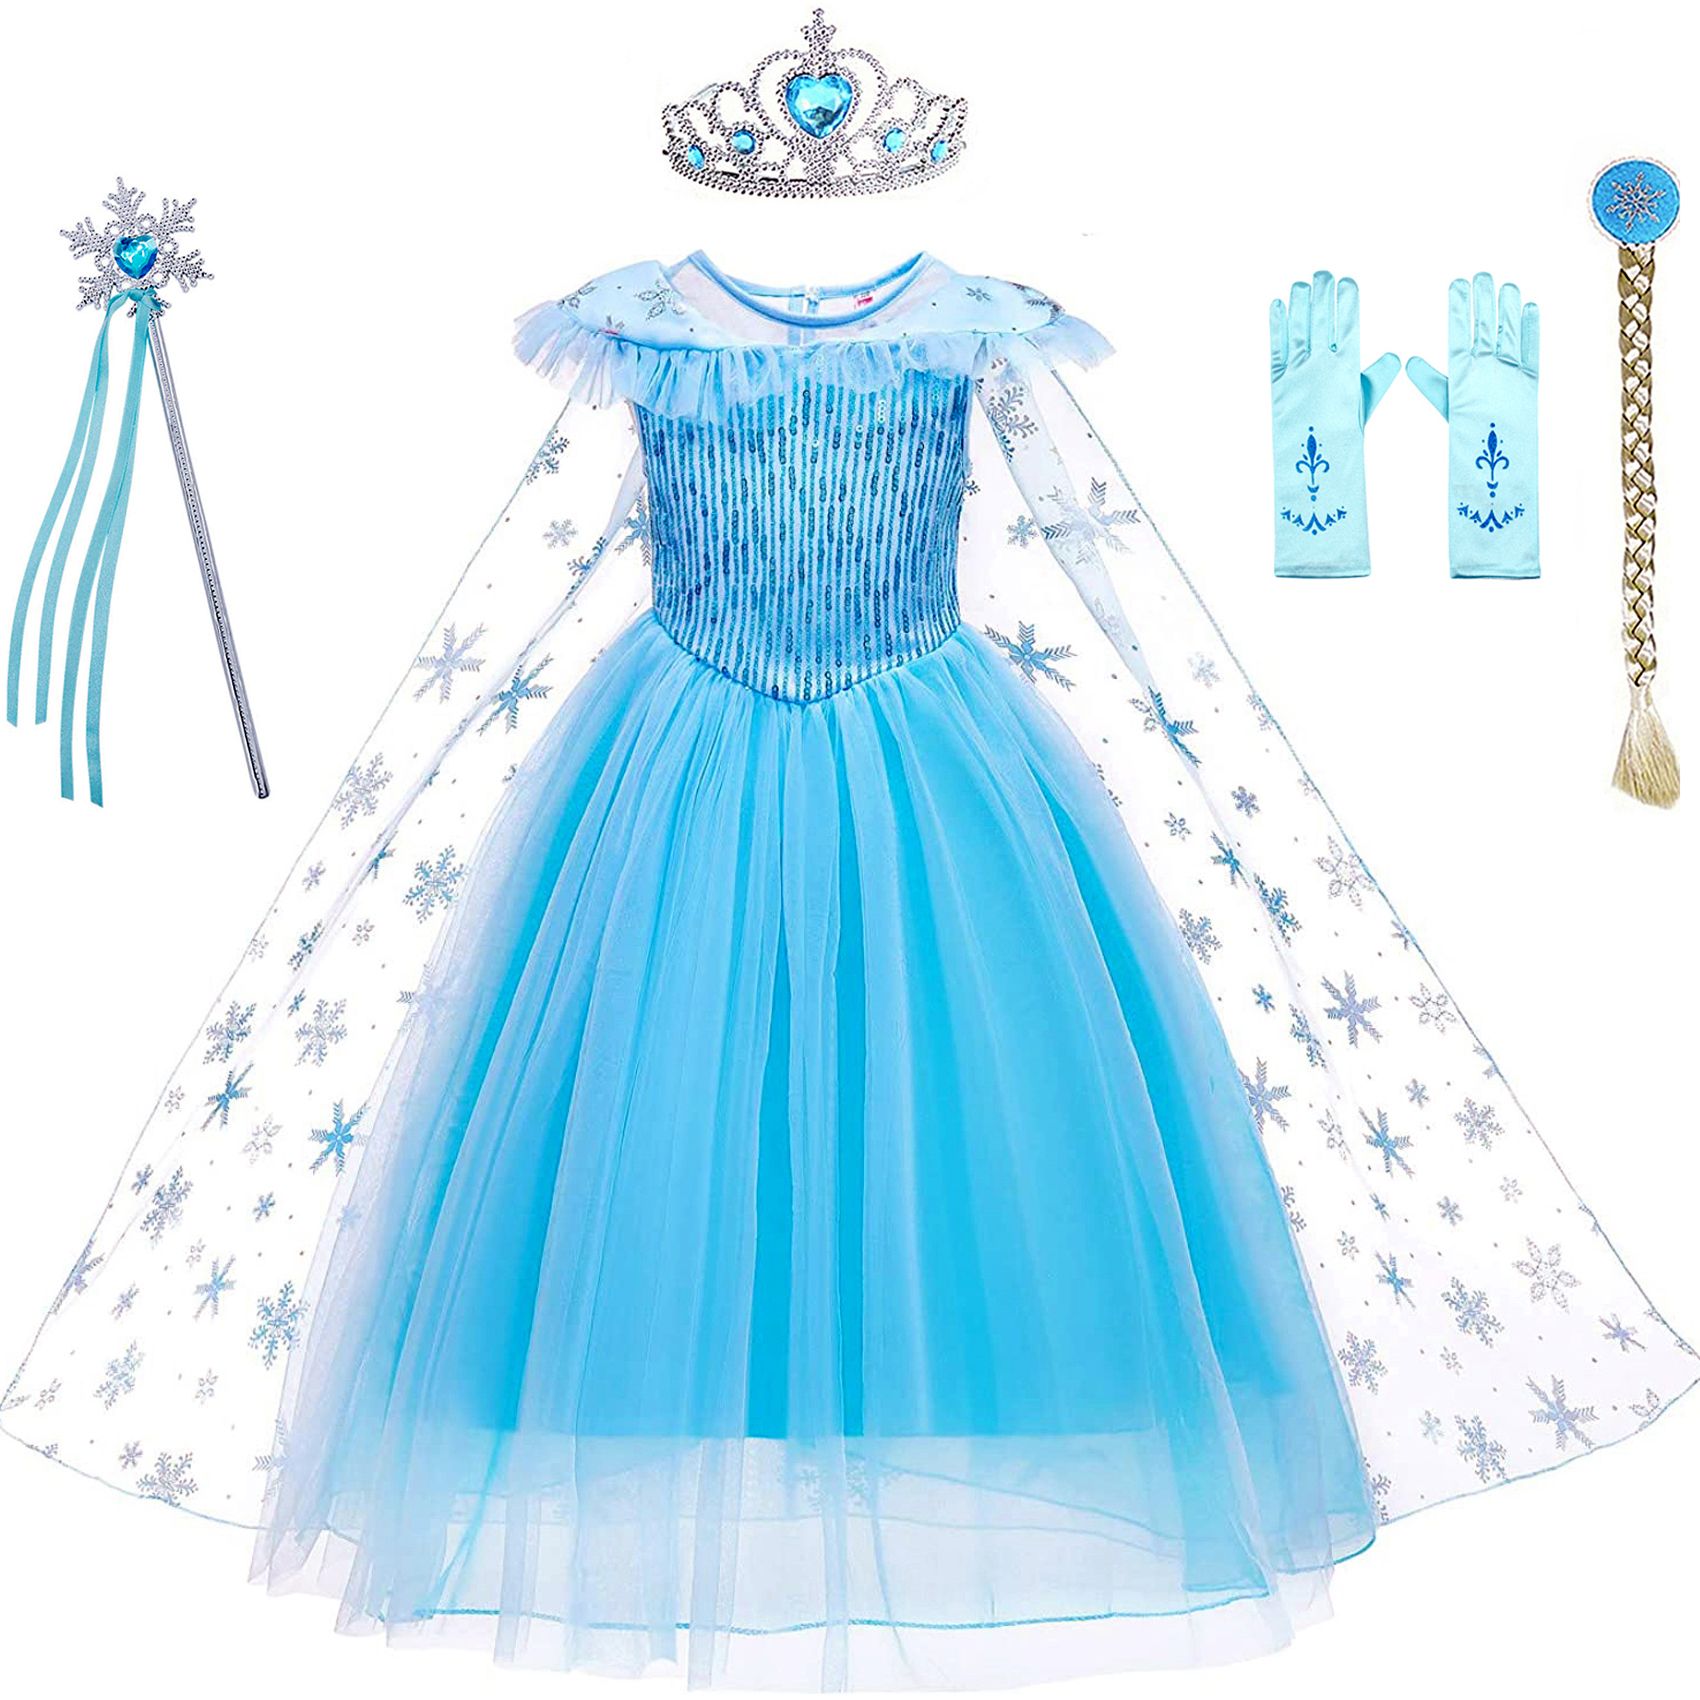 Avady Girls Dress Christmas Princess Costume for Frozen Elsa Blue with Cape Wand Wig Crown Gloves | Walmart (US)